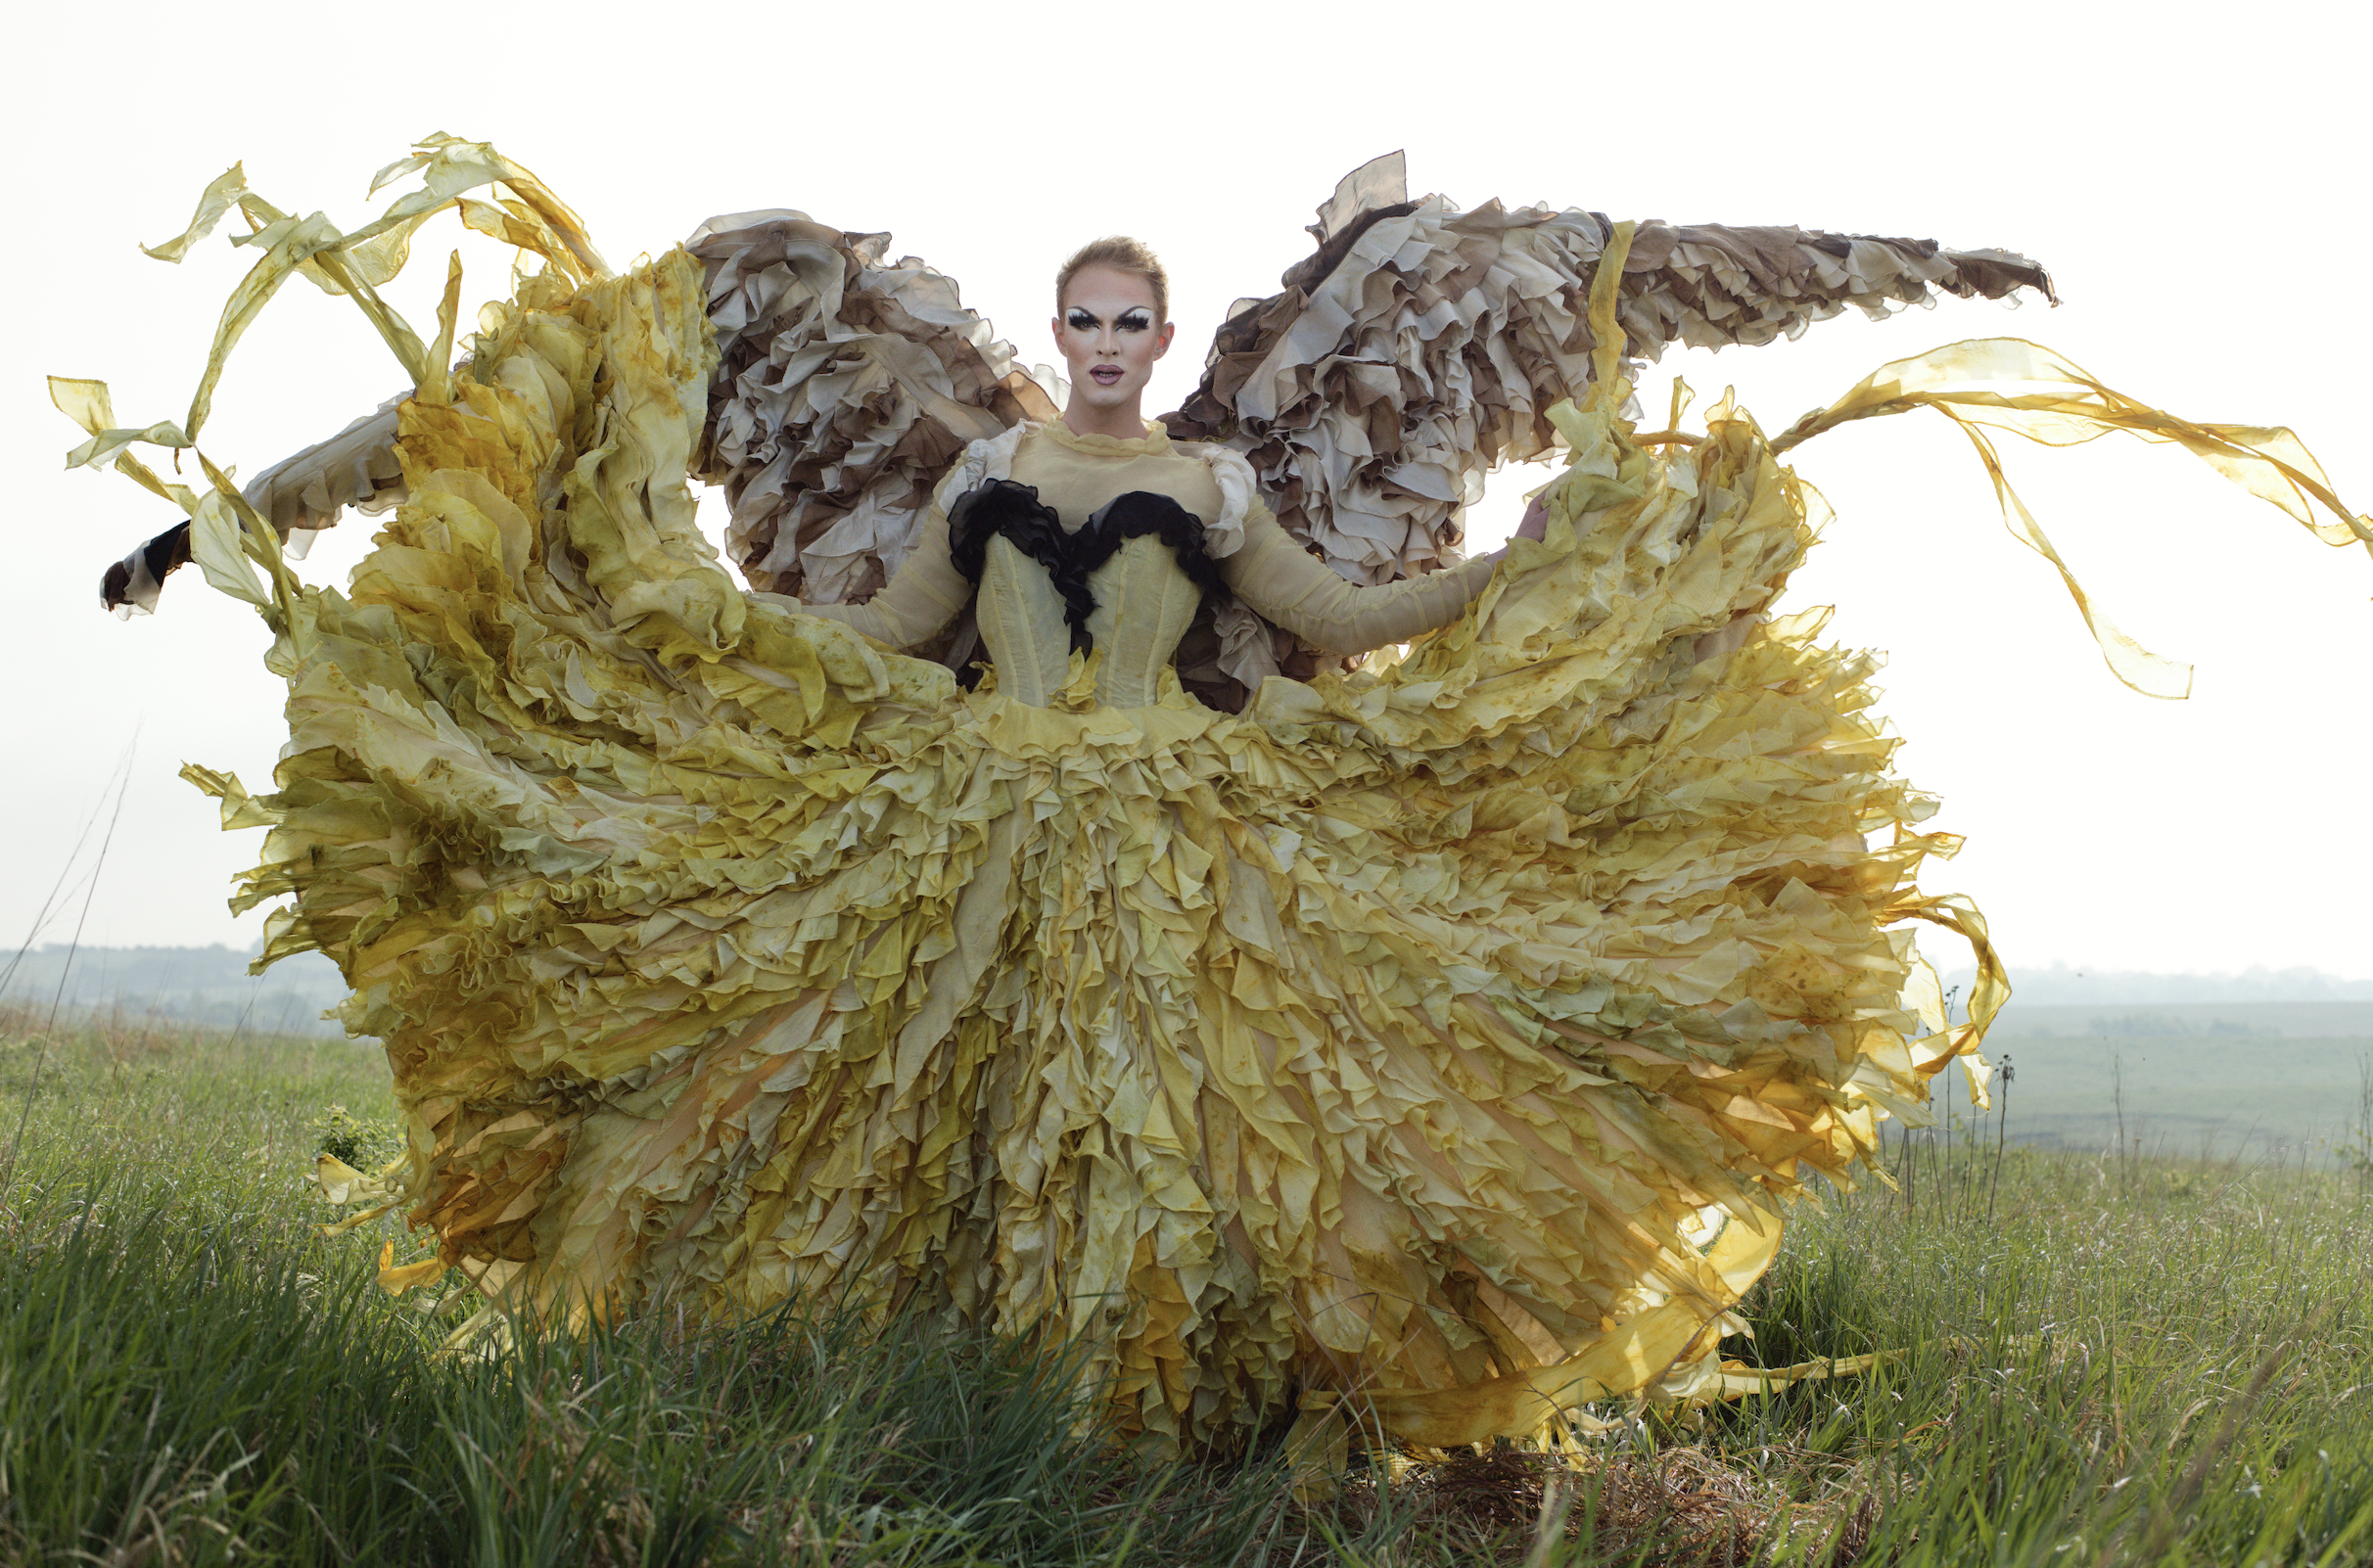 Pattie Gonia wears a dress with naturally dyed yellow ruffles and large wings dyed with walnut.